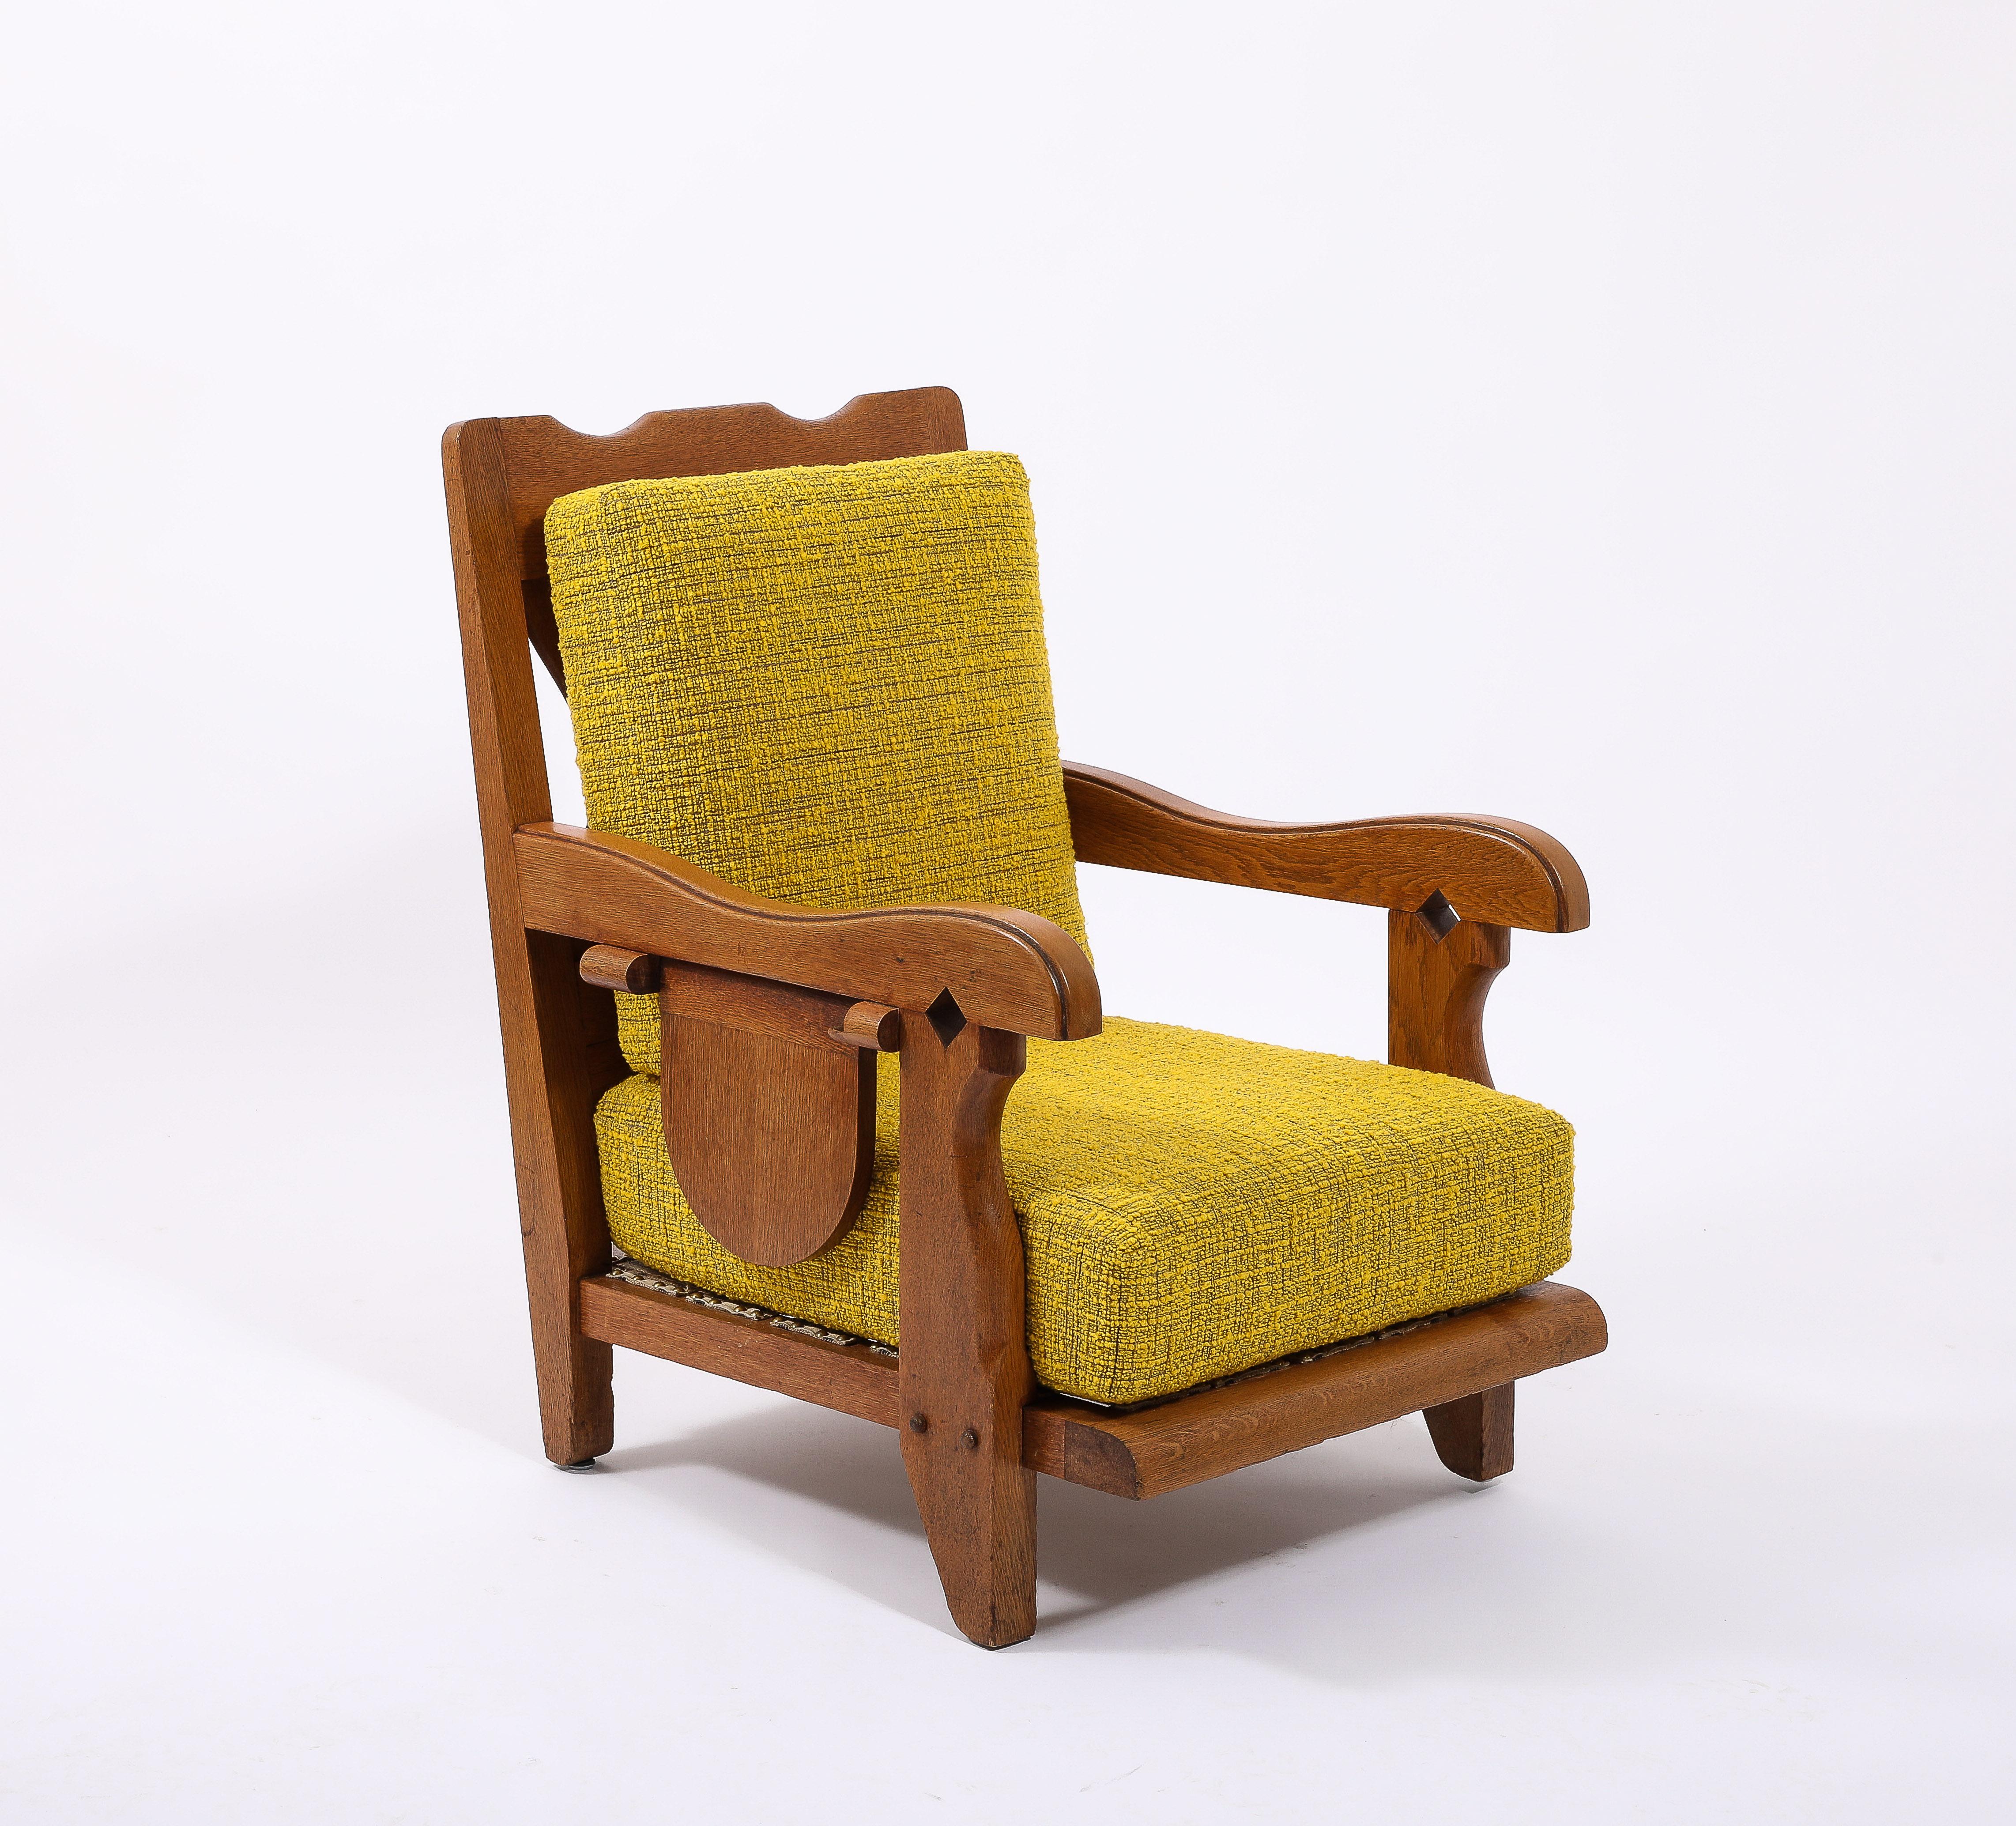 Brutalist Large Oak & Yellow Wool Armchair with side Shelf, France 1950's For Sale